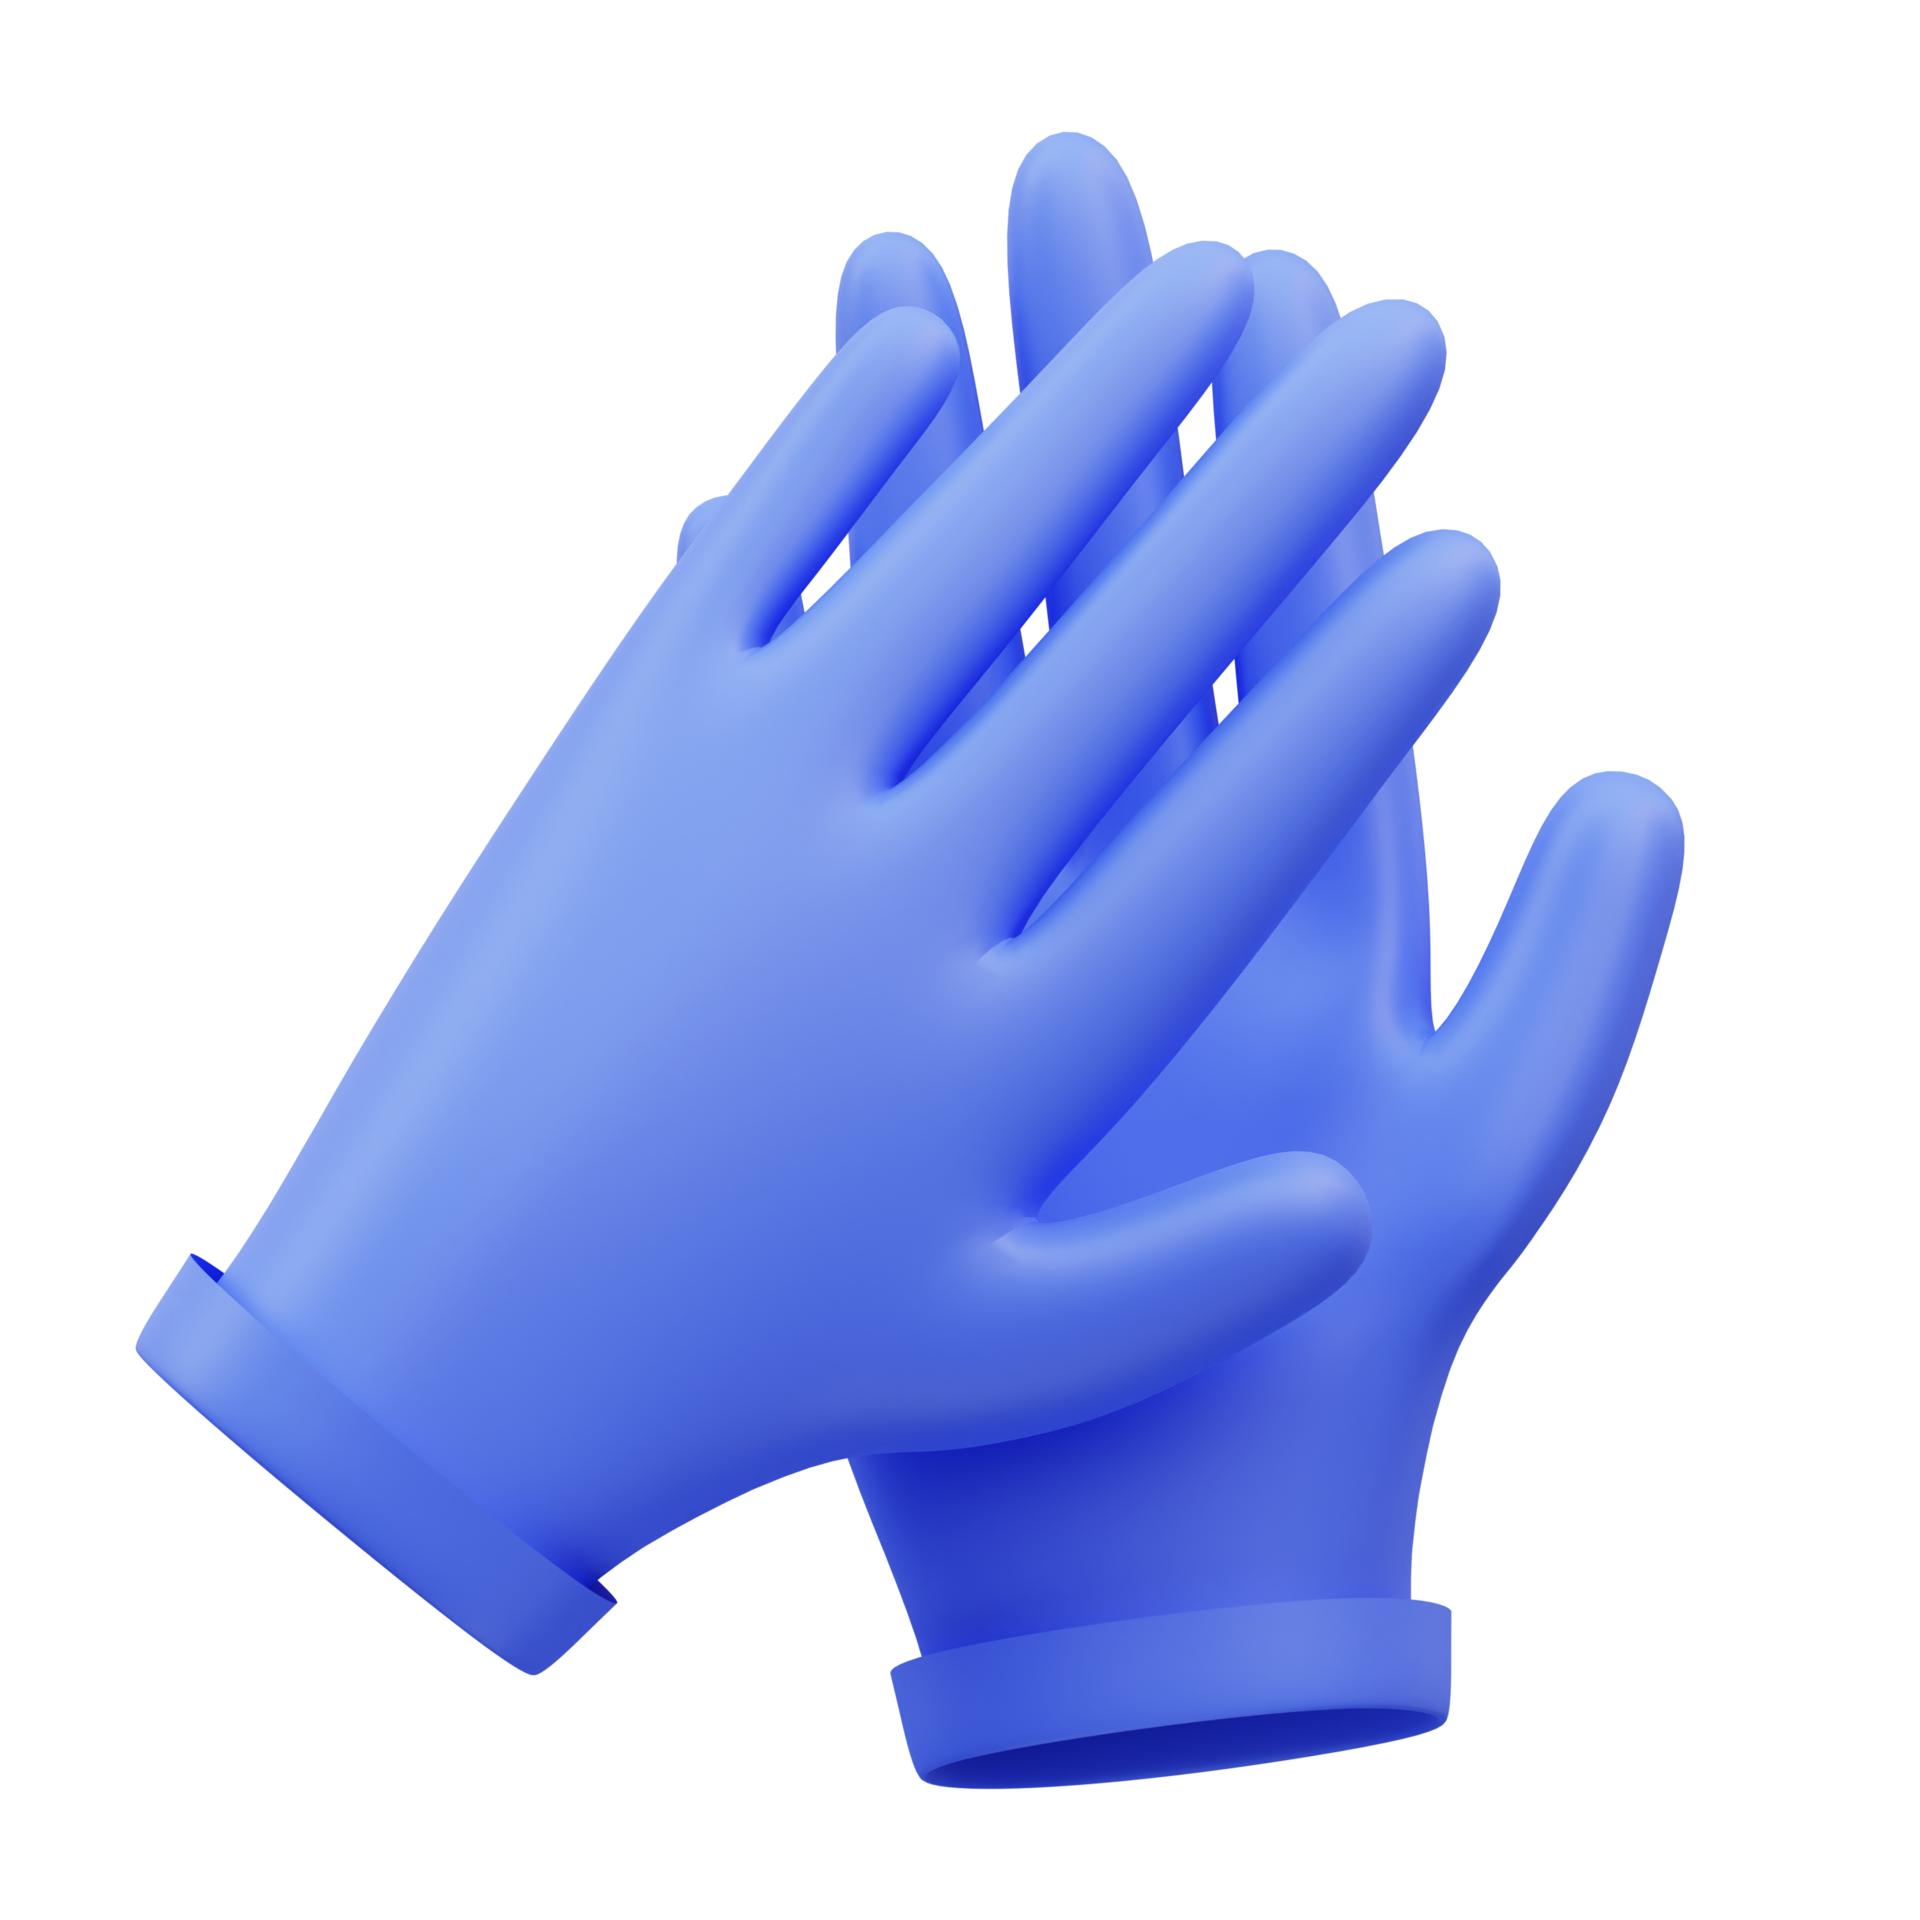 https://static.vecteezy.com/system/resources/previews/021/095/643/original/3d-render-gloves-icon-illustration-suitable-for-safety-design-themes-user-manual-themes-web-app-etc-png.png